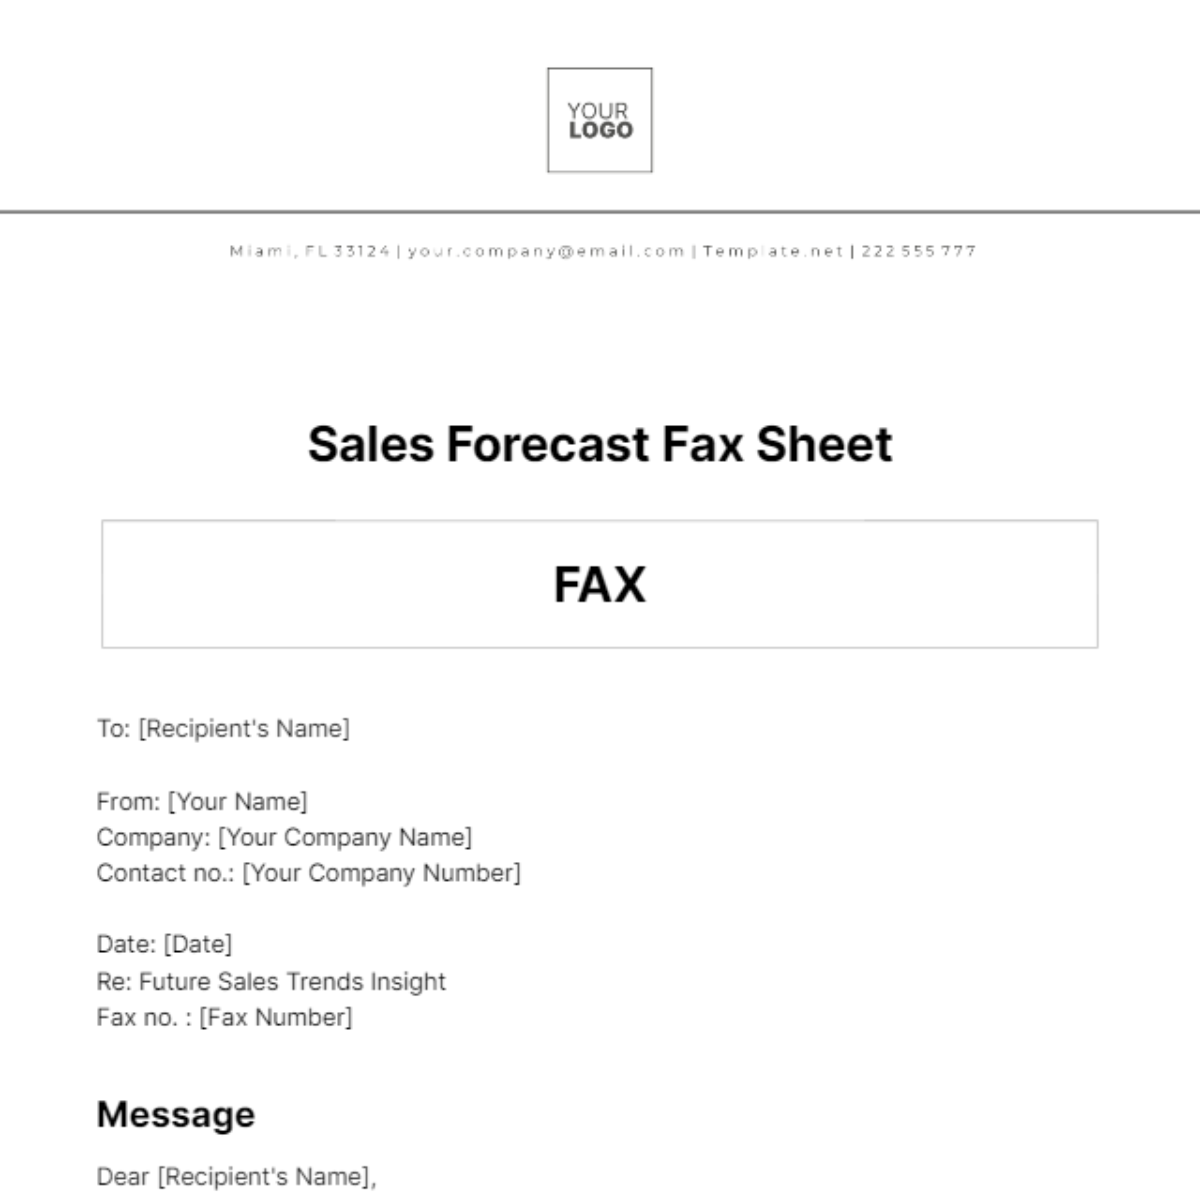 Free Sales Forecast Fax Sheet Template